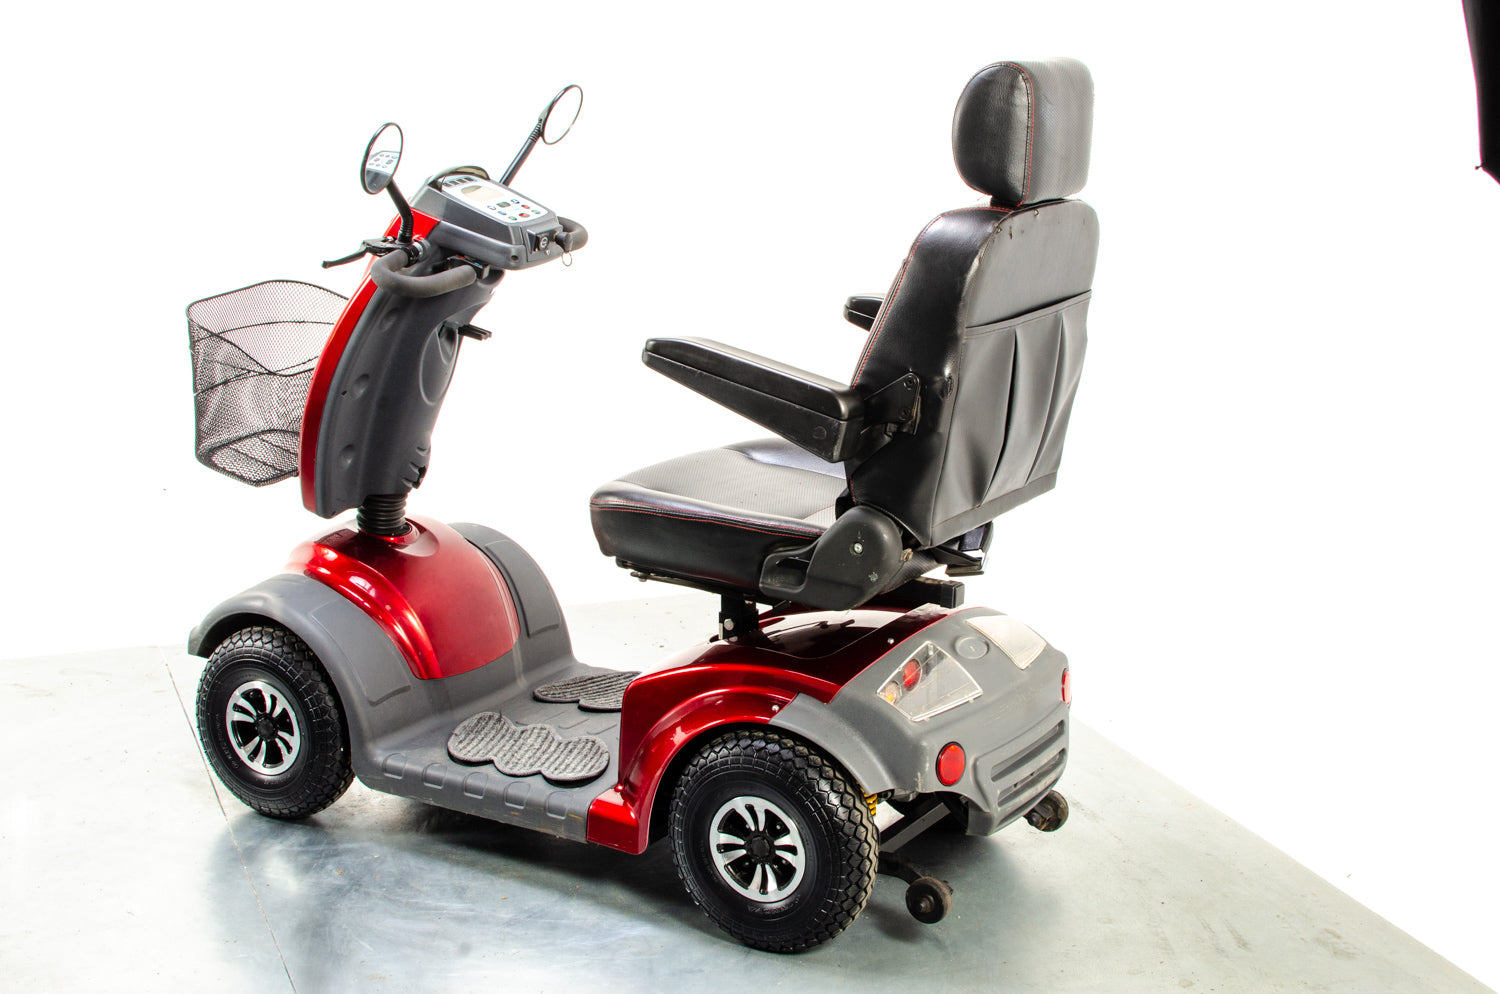 TGA Mystere Used Mobility Scooter Comfy 8mph Suspension Road All-Terrain